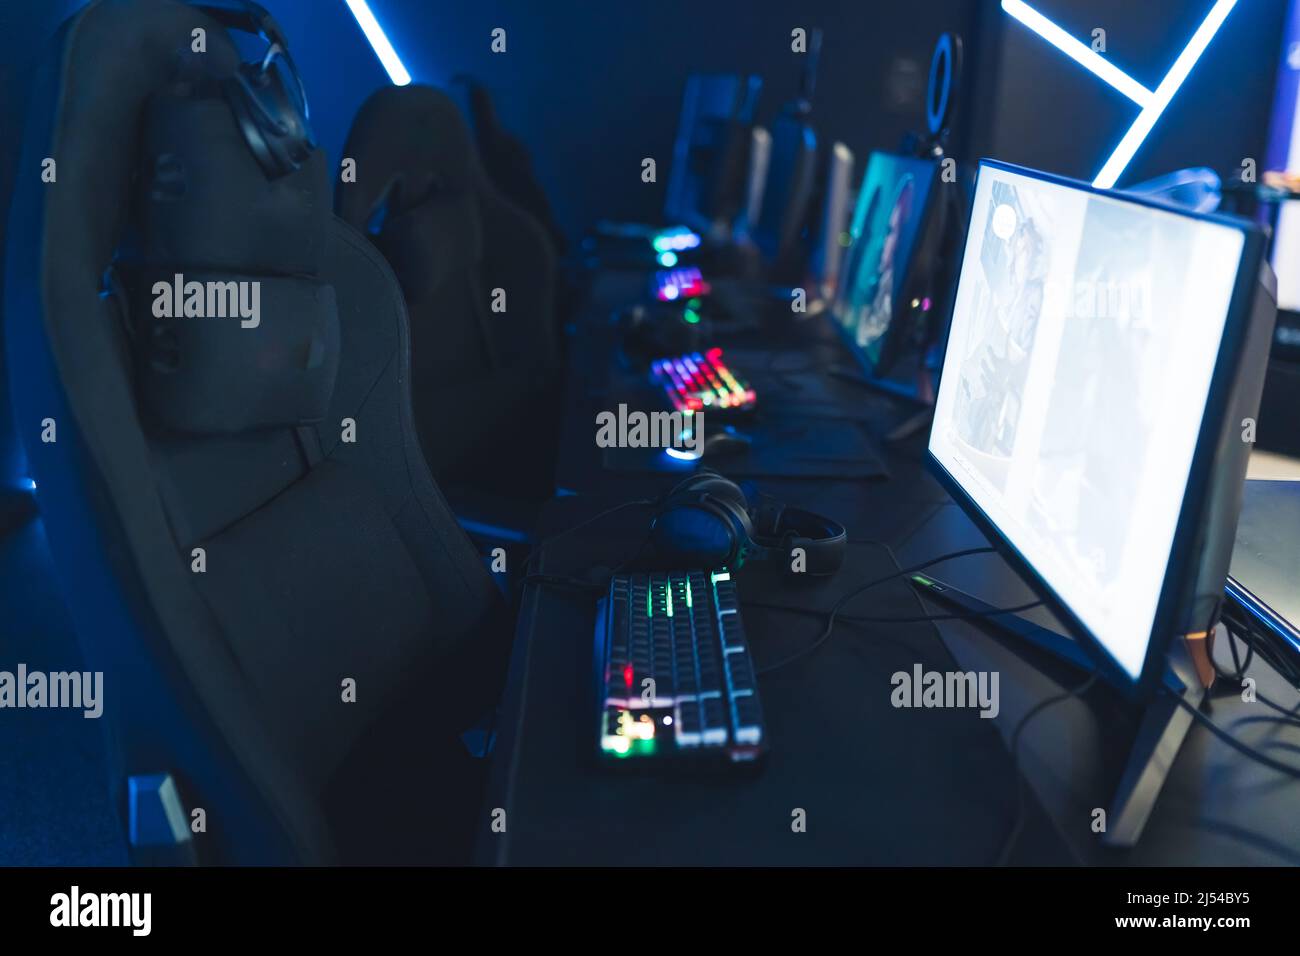 Empty glow neon illuminated cybercafe room with computers on tables, professional seats, and illuminated keyboards no people. Modern cyber sport. High quality photo Stock Photo